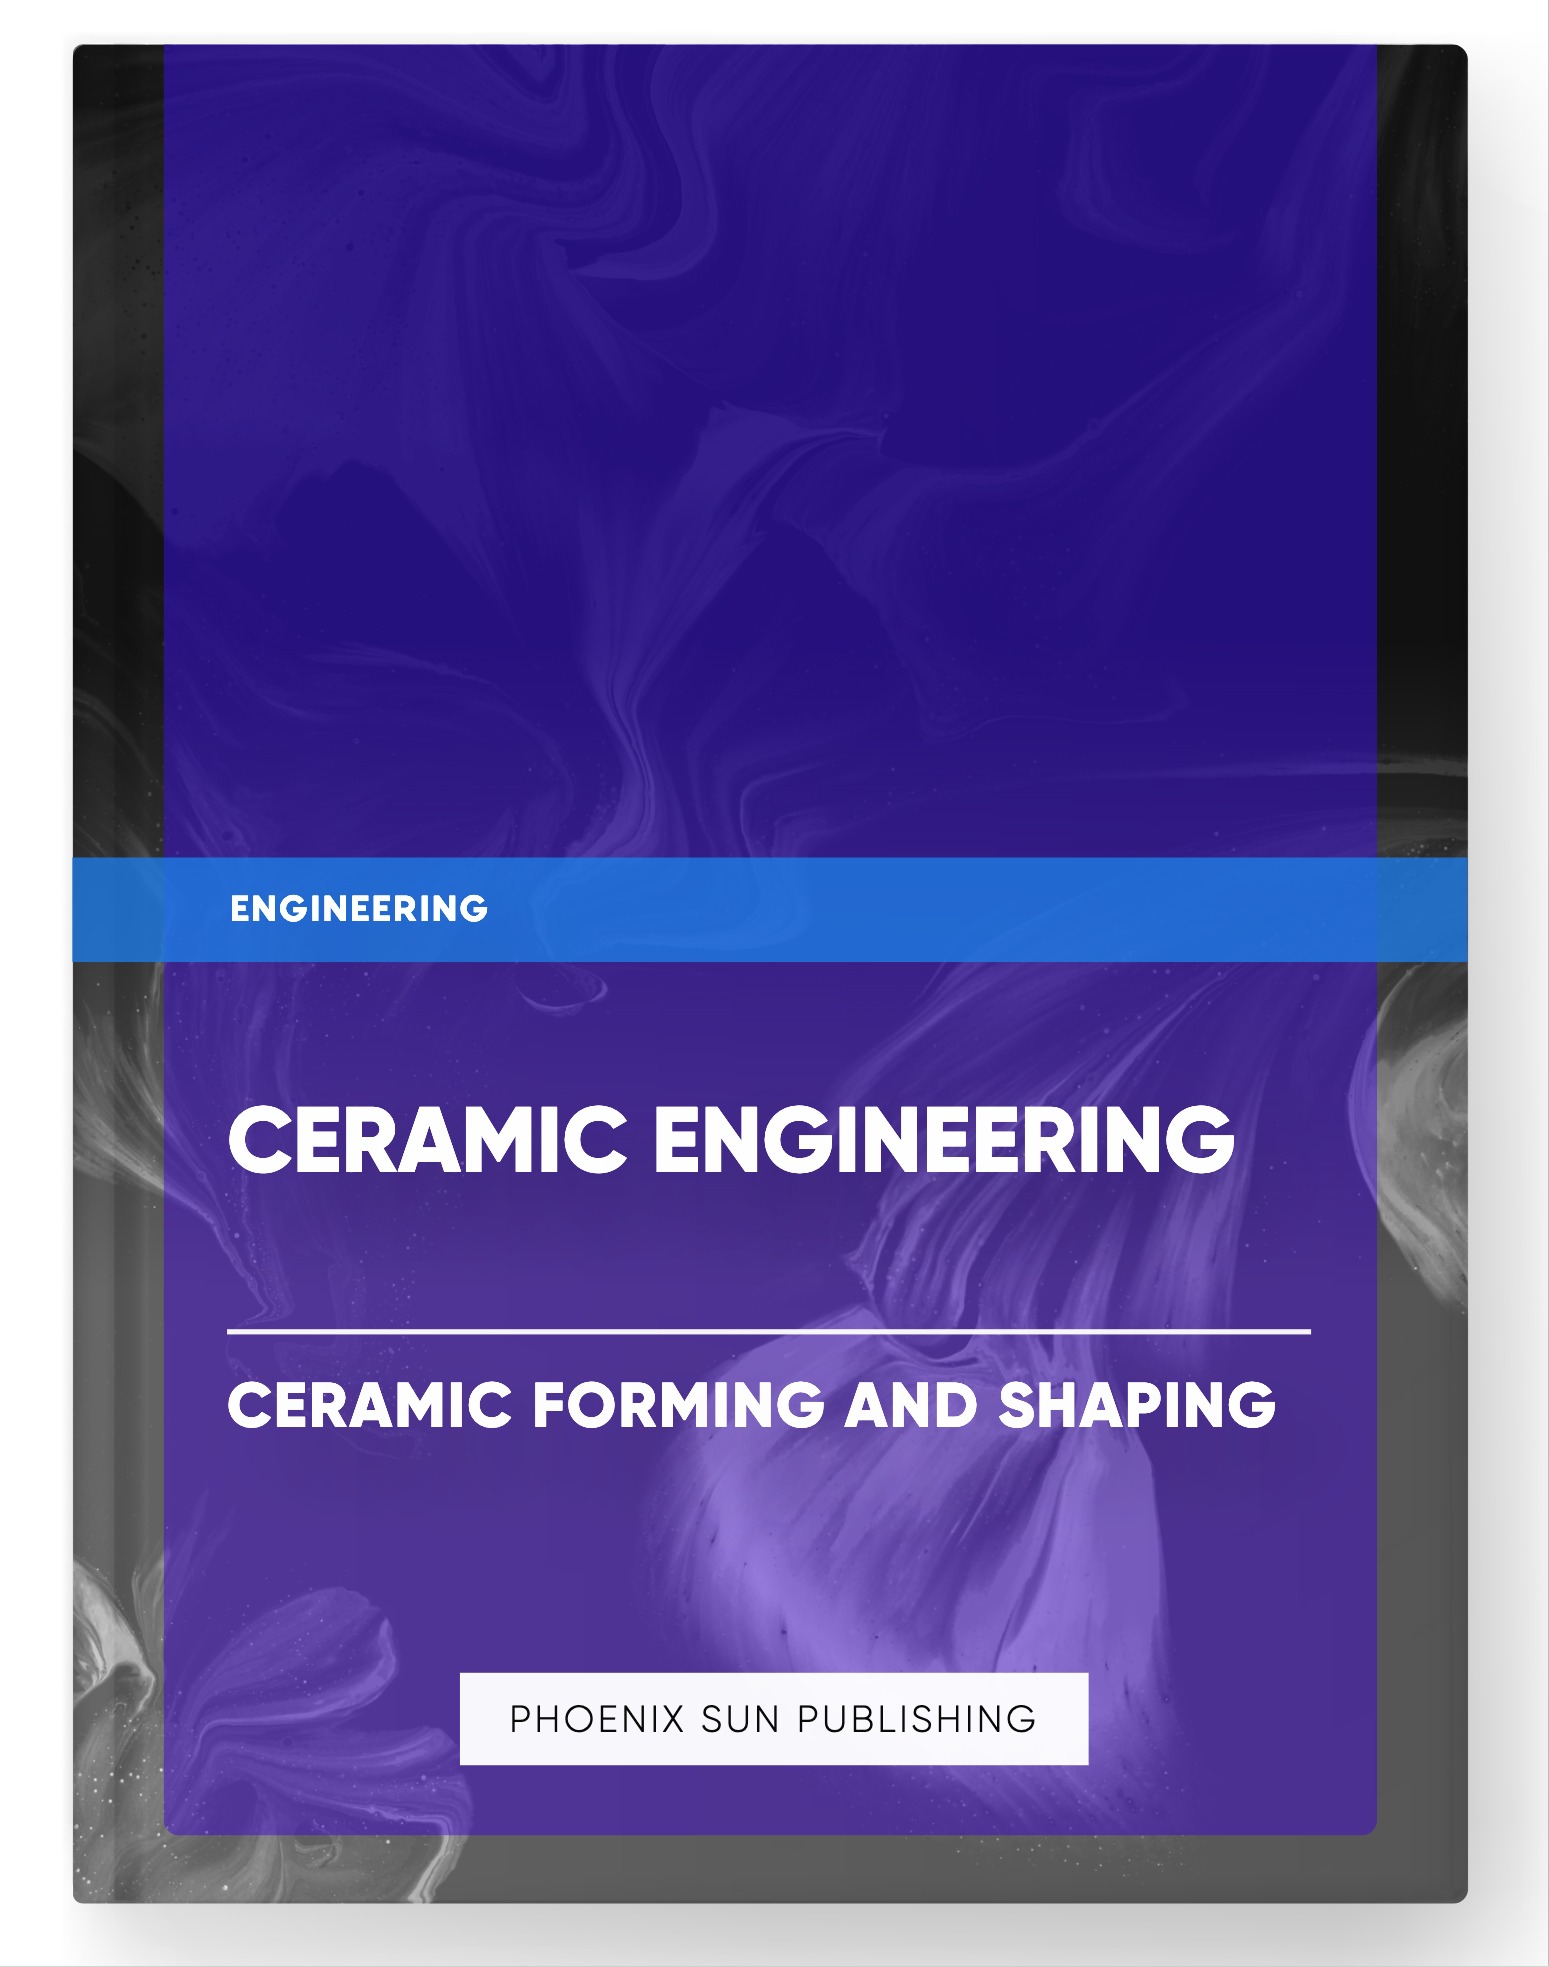 Ceramic Engineering – Ceramic Forming and Shaping